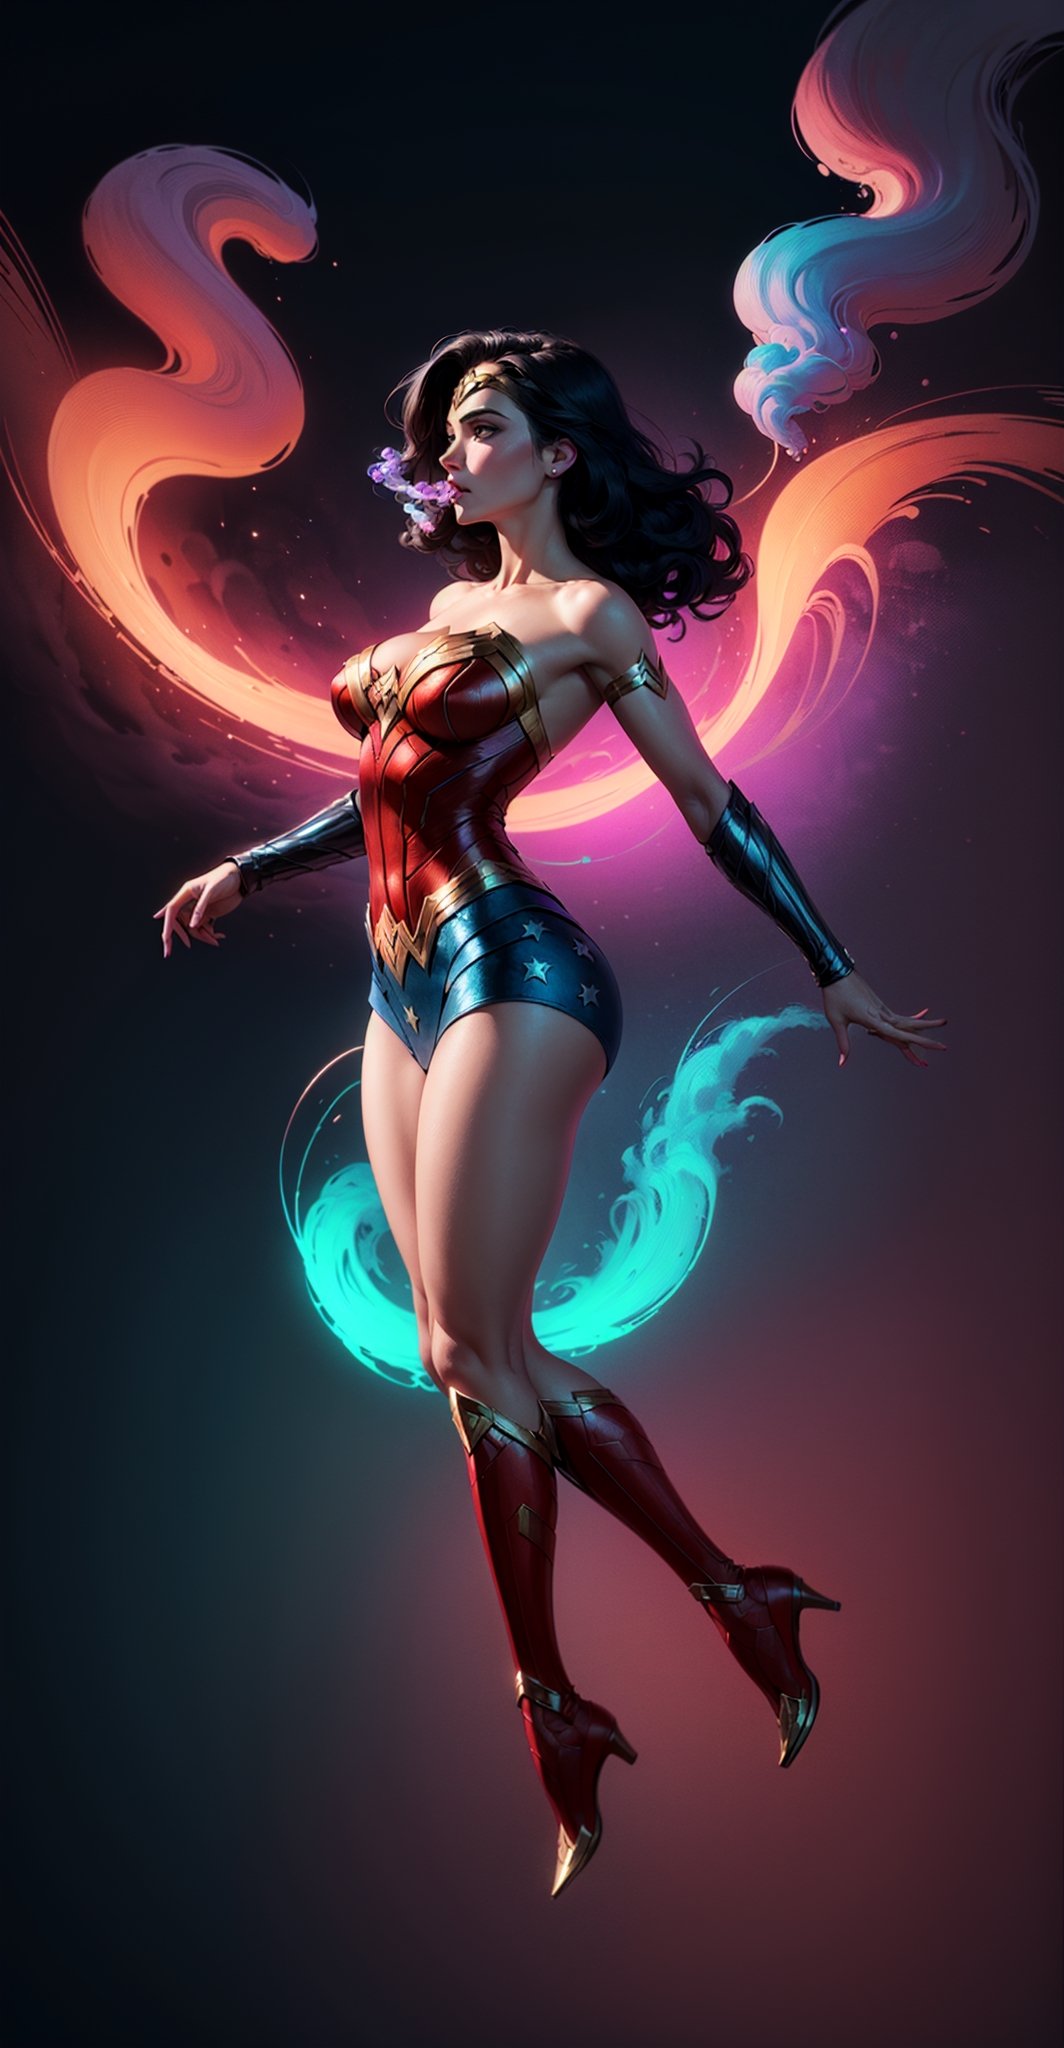 Wonder Woman (big tits),(( side view,)),((full body)),((floating in air)),masterpiece, best quality, ((abstract, psychedelic, neon, smoke , background)),(creative:1.3), sy3, SMM, fantasy00d